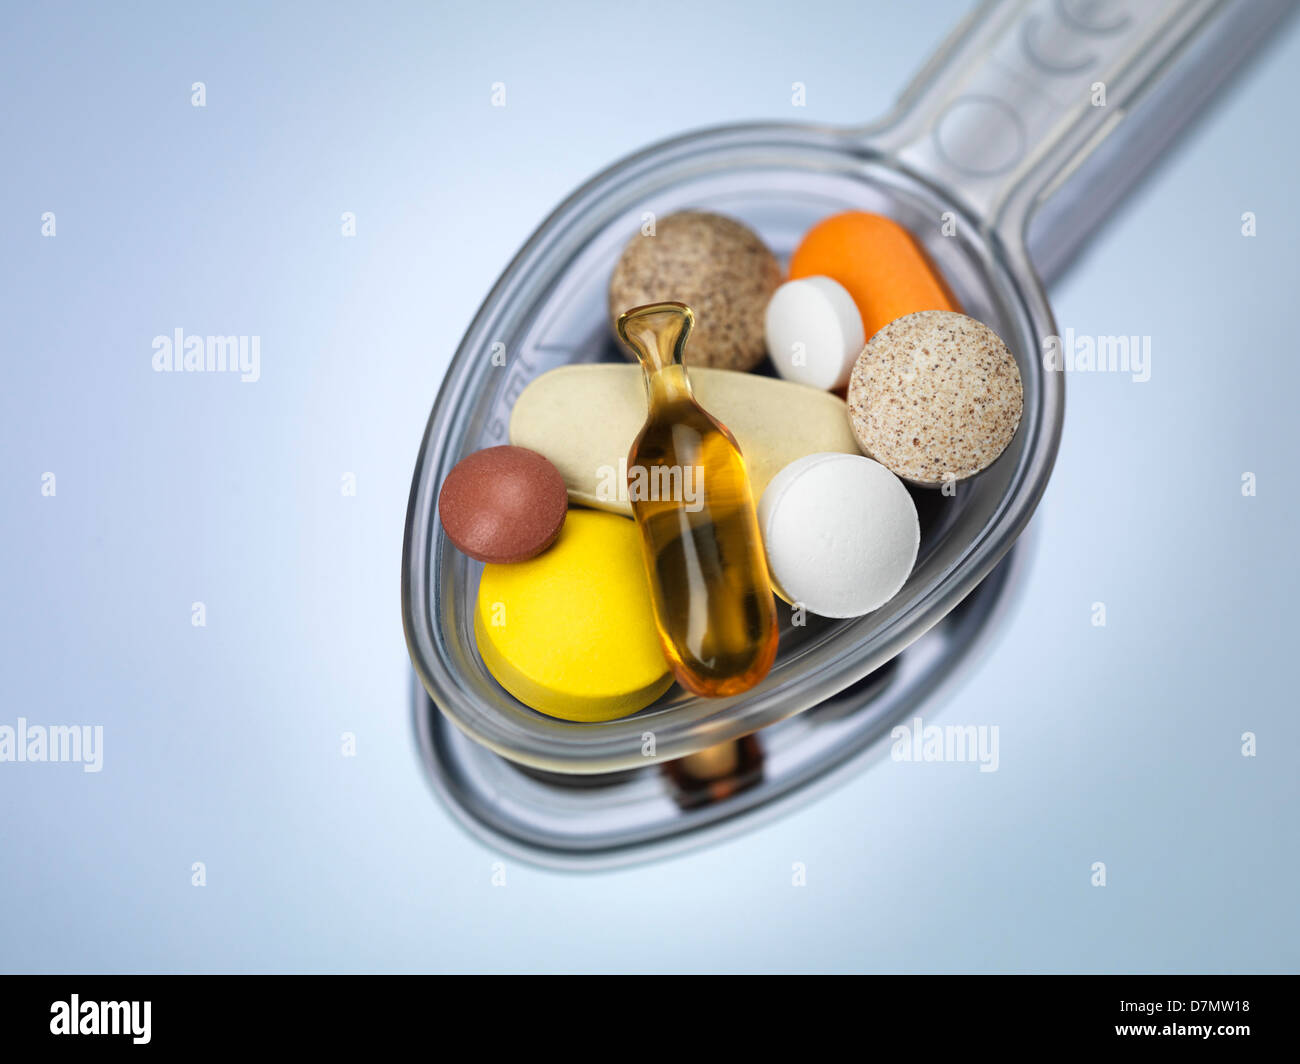 Spoonful of supplements Stock Photo